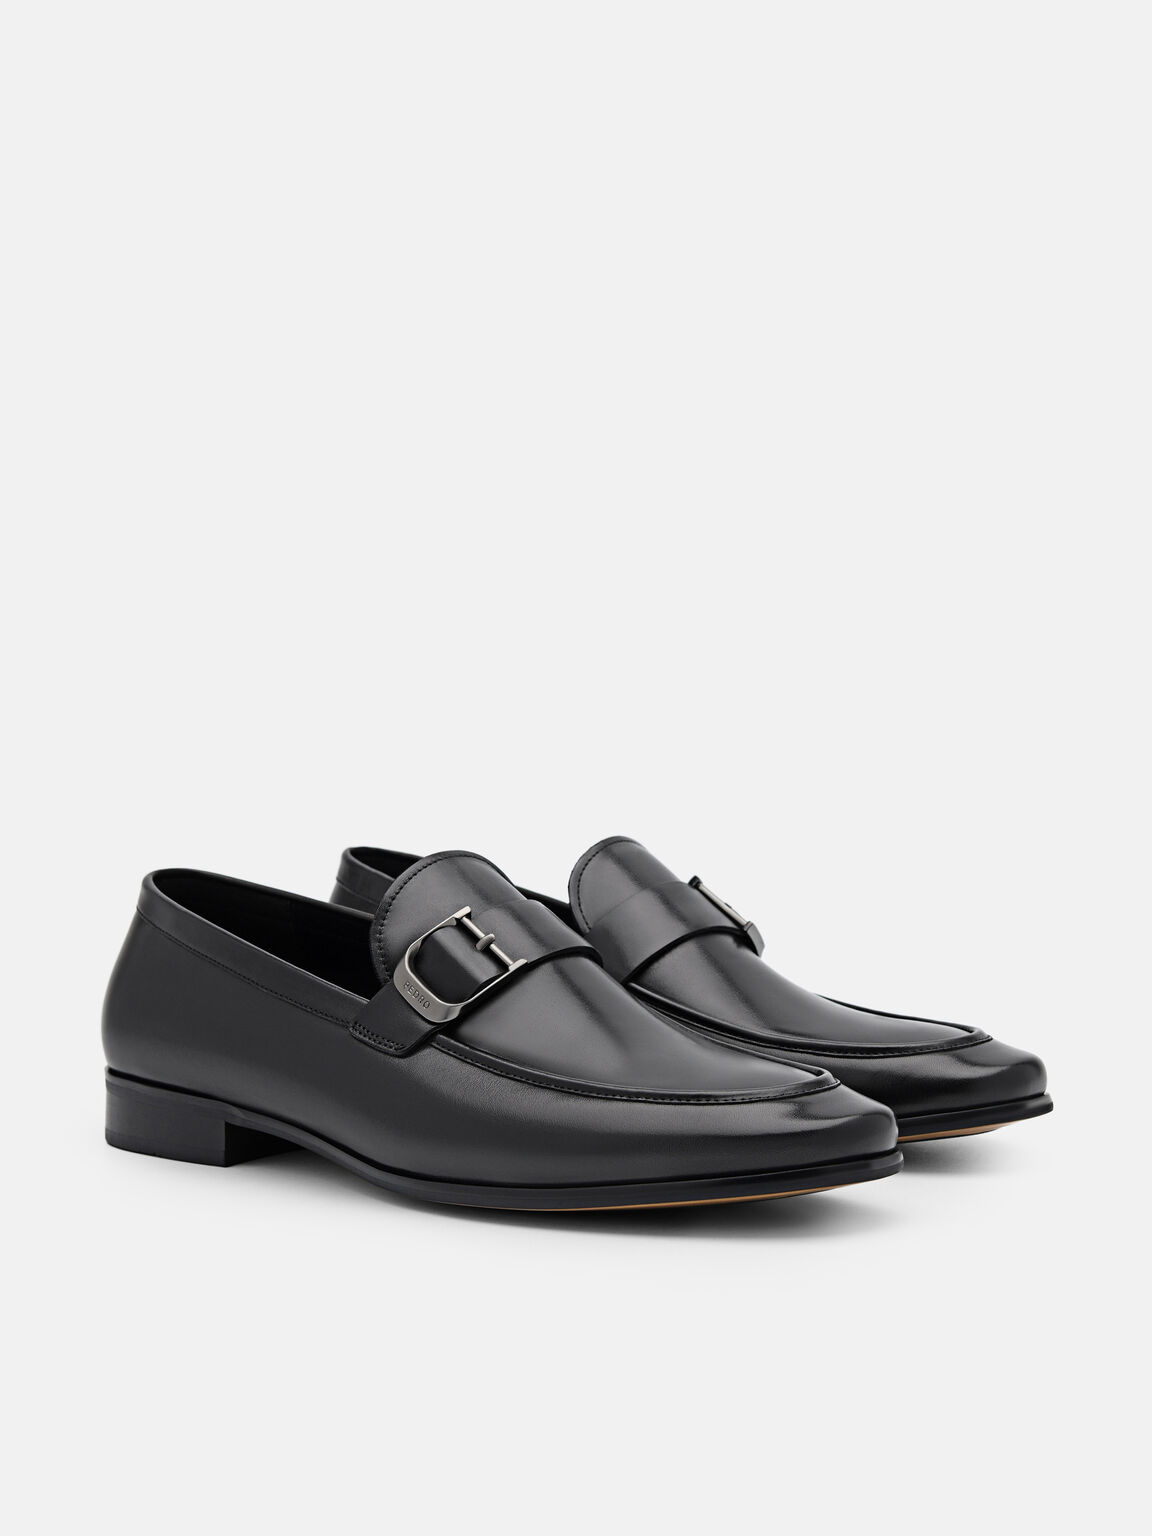 Helix Leather Loafers, Black, hi-res